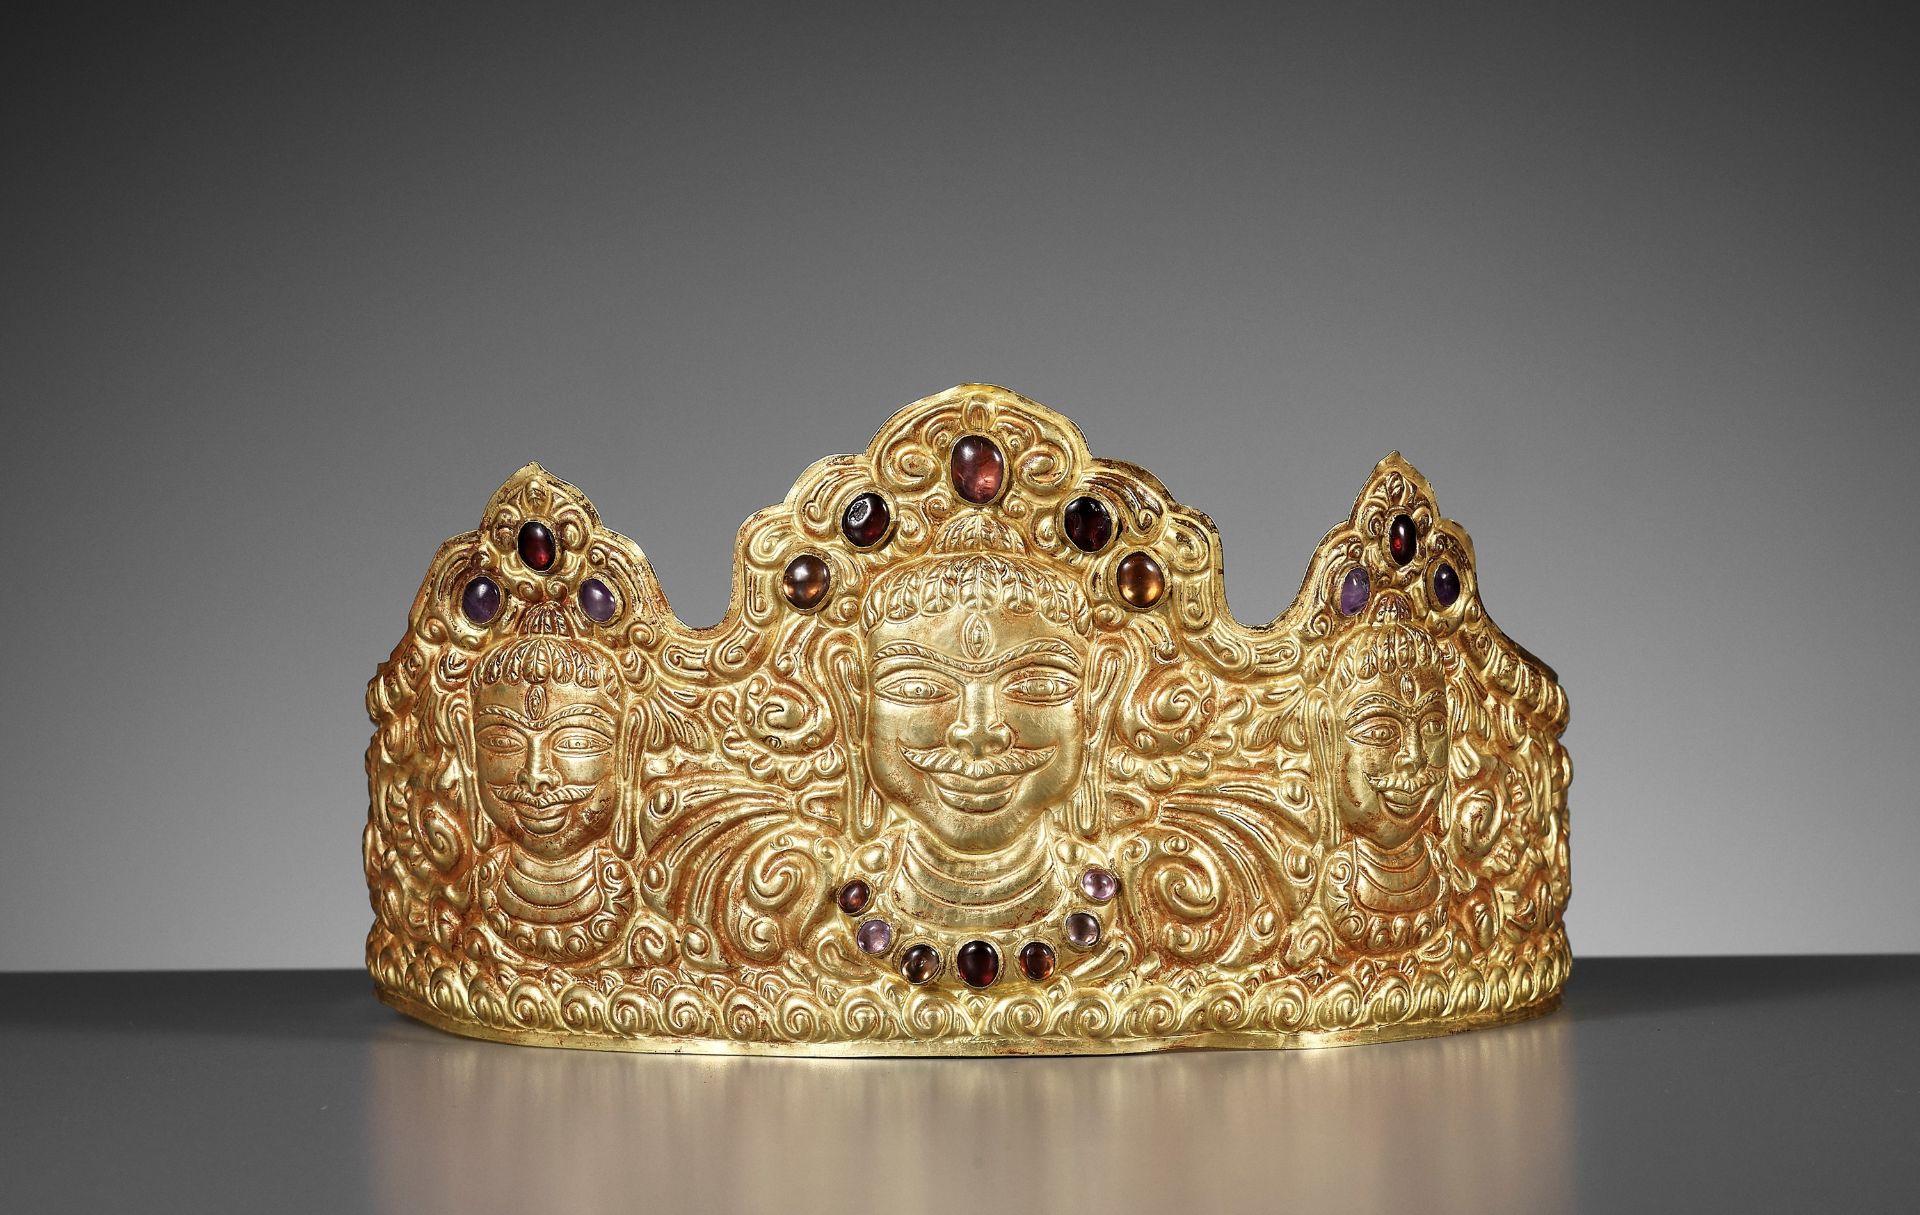 AN IMPORTANT CHAM GOLD REPOUSSE AND GEMSTONE-SET DIADEM, CHAM PERIOD